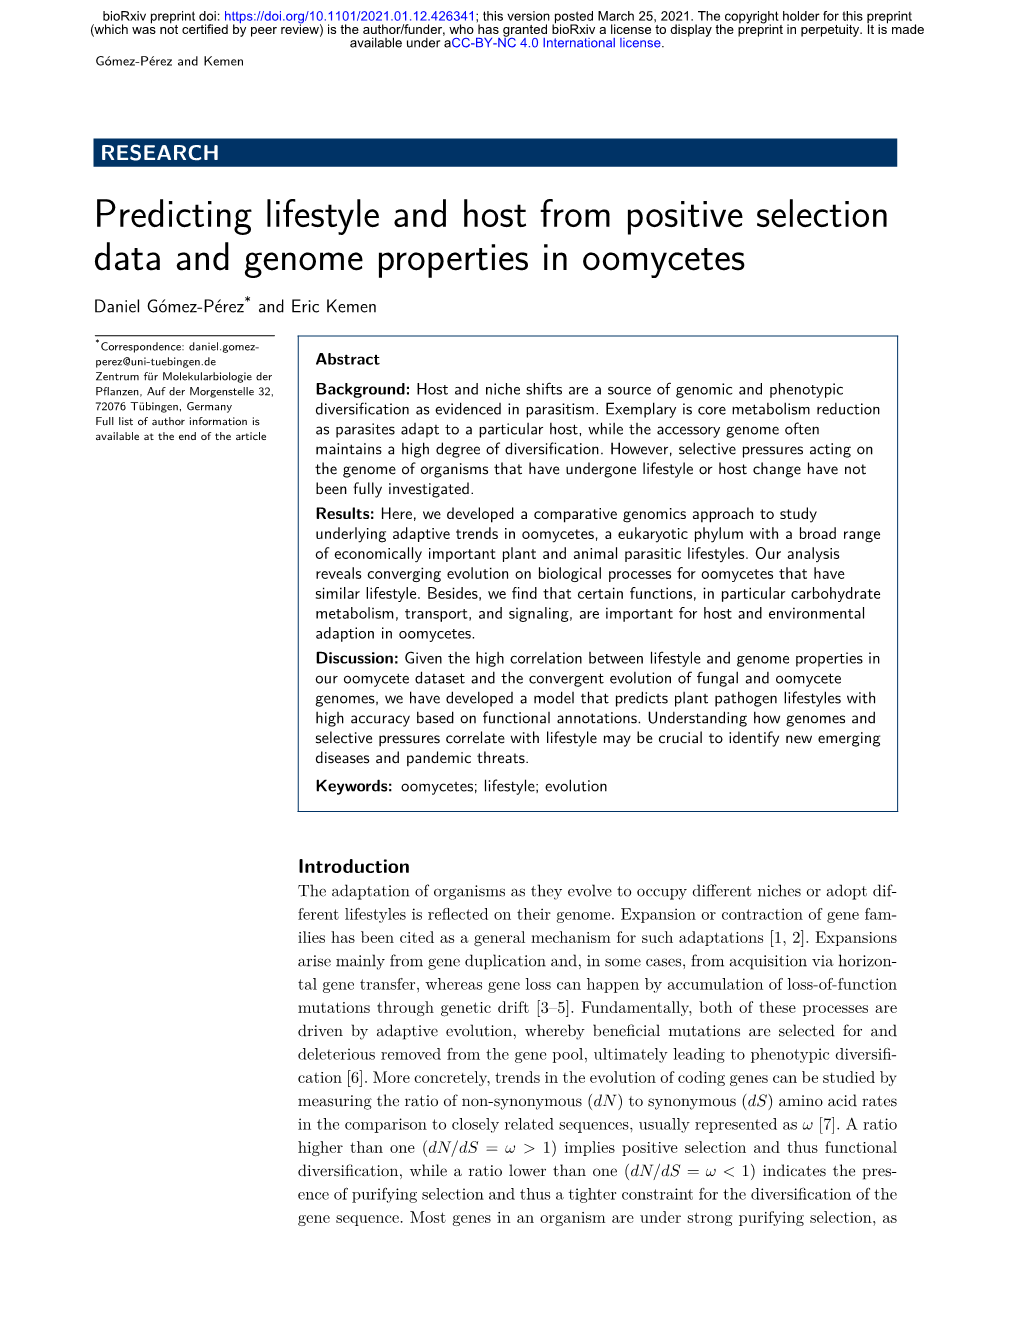 Predicting Lifestyle and Host from Positive Selection Data and Genome Properties in Oomycetes